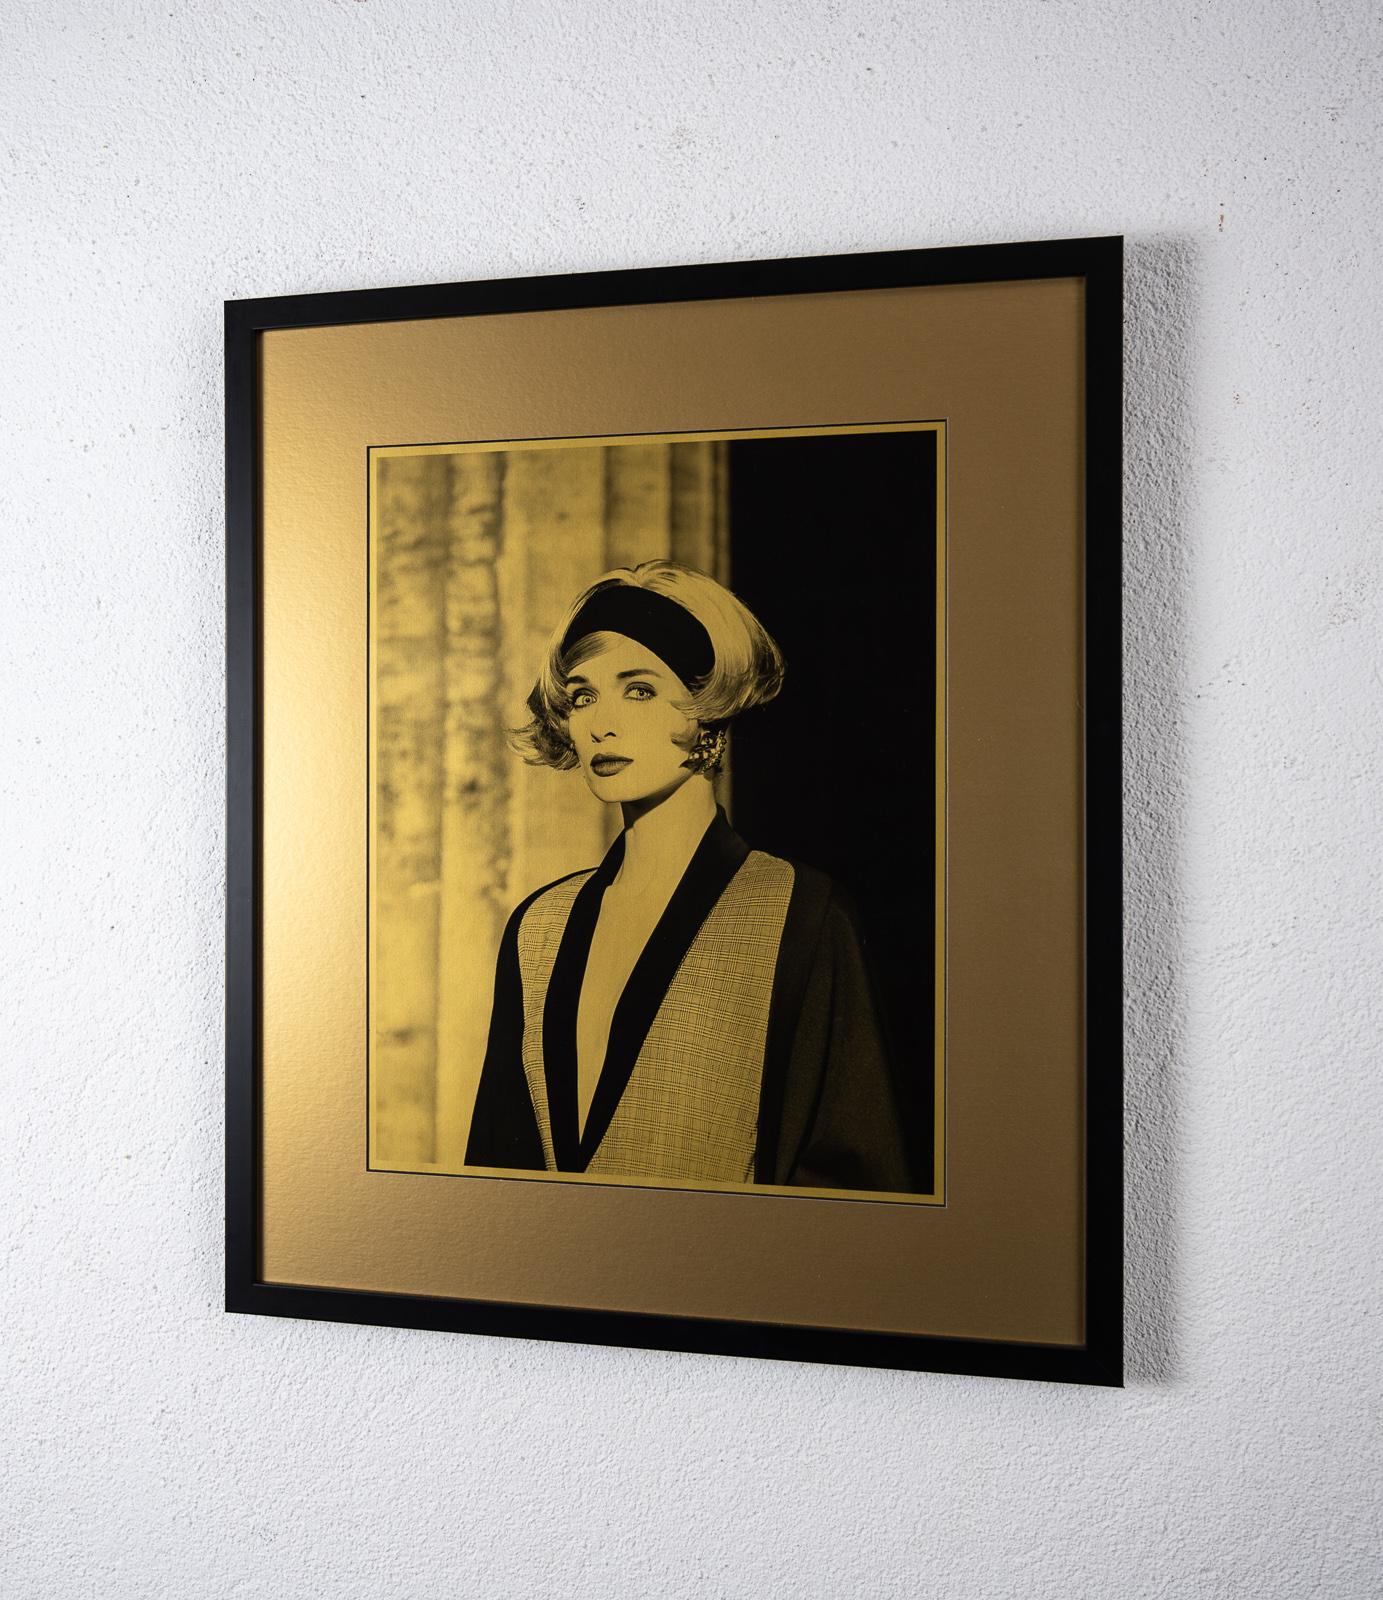 Original silver gelatin print on gold paper from Lagerfeld's studio ex-collection Eric Wright - Lagerfeld's right hand man in the 1980s-90s. 
production numbers '04111/002 - 15' to the reverse. Circa: 1990s

Measures: framed (frame 54cm wide x